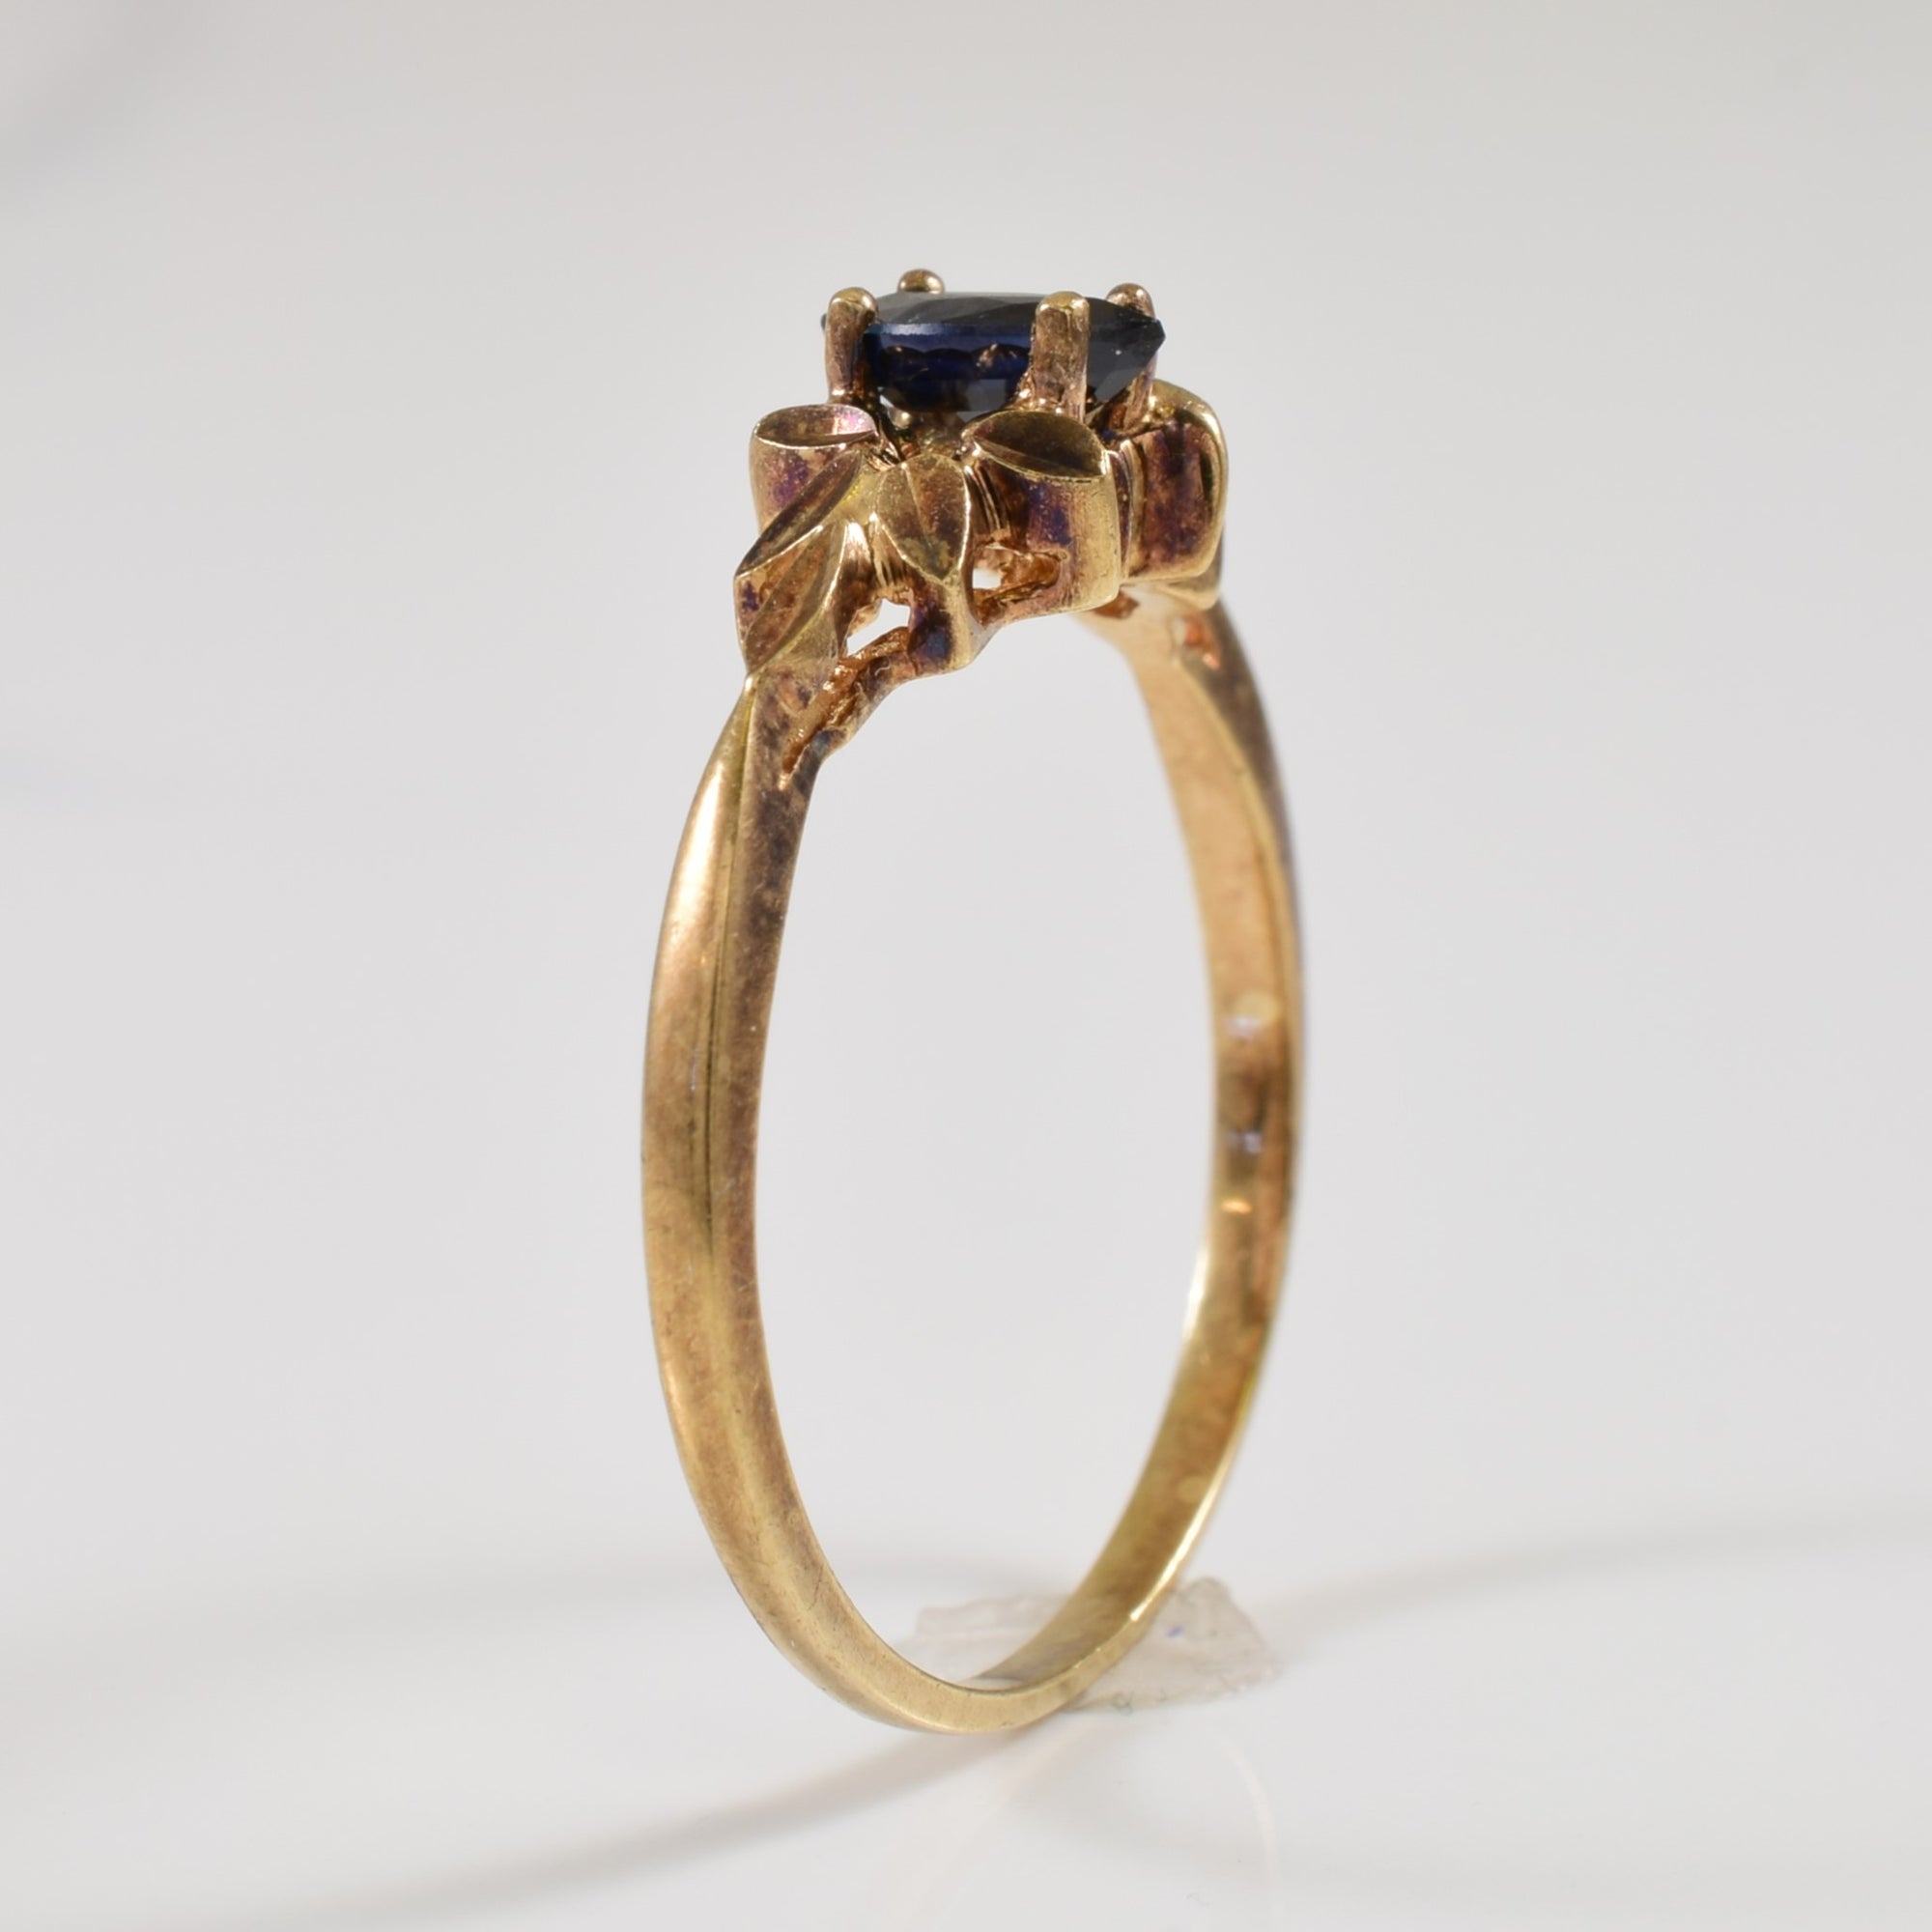 Marquise Blue Sapphire Ring | 0.25ct | SZ 6.75 |